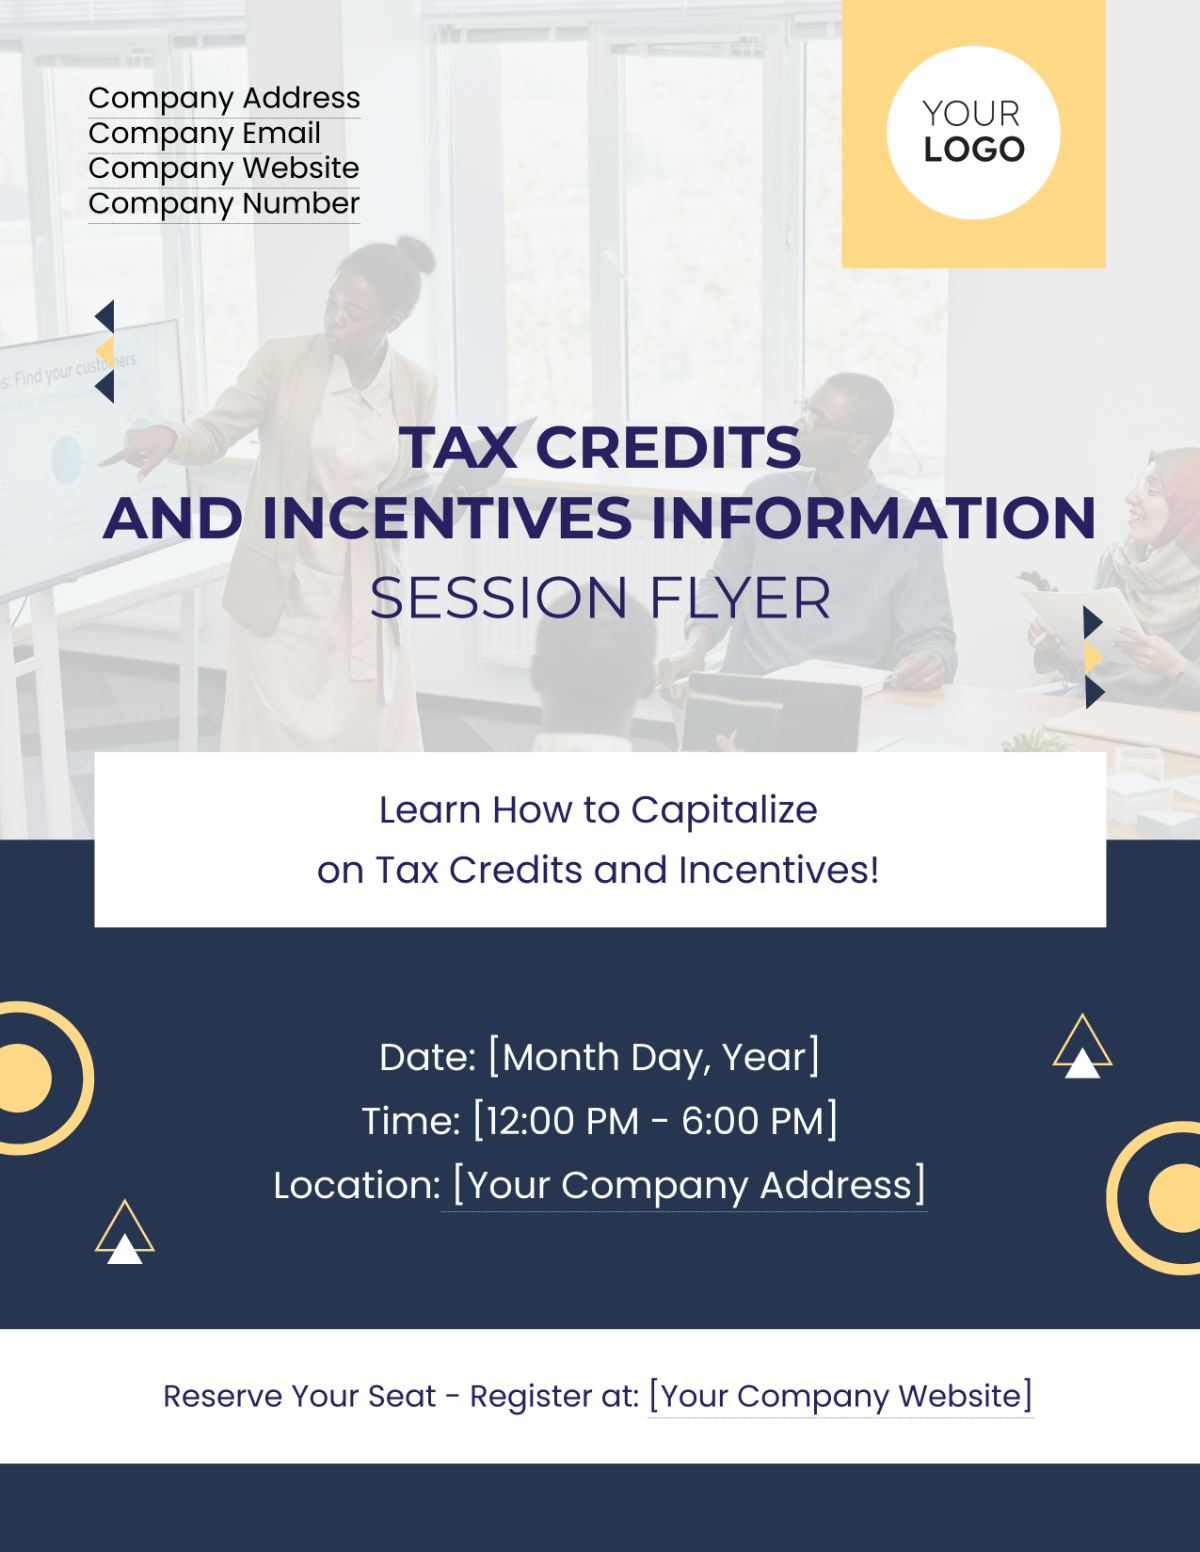 Tax Credits and Incentives Information Session Flyer Template